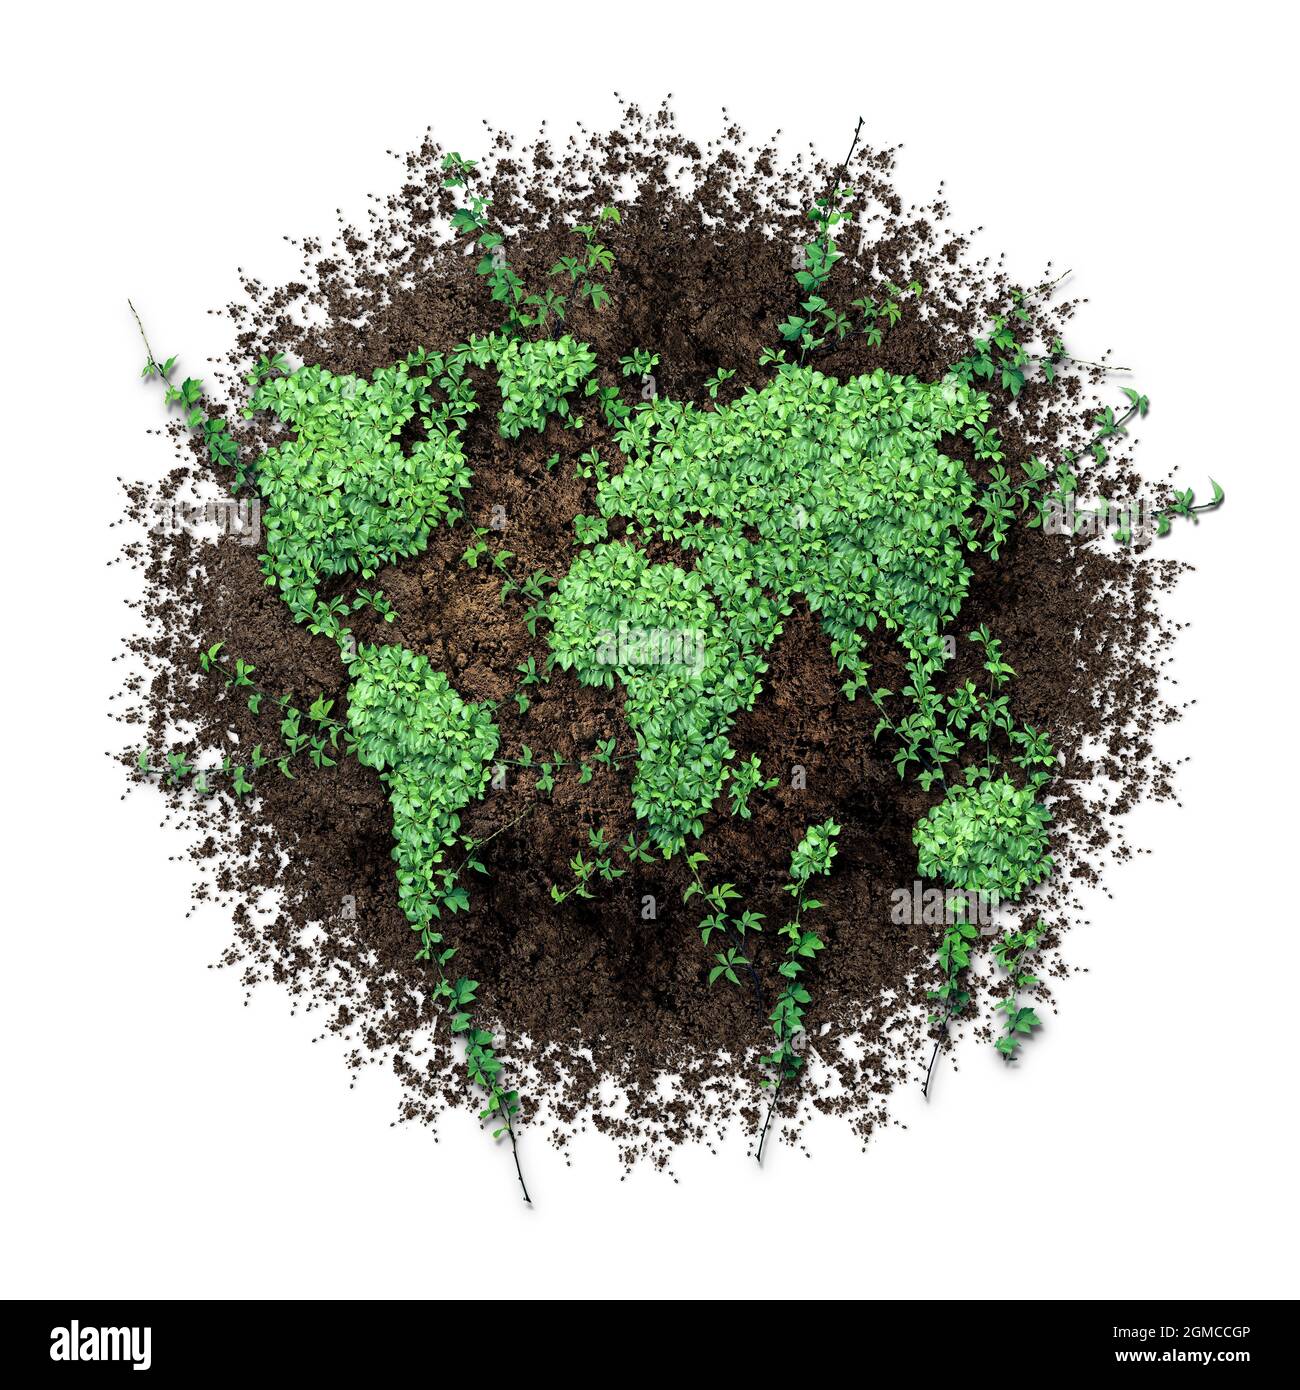 Earth day symbol celebration as an international climate change concept or eco friendly habitat protection as plants shaped as the planet. Stock Photo